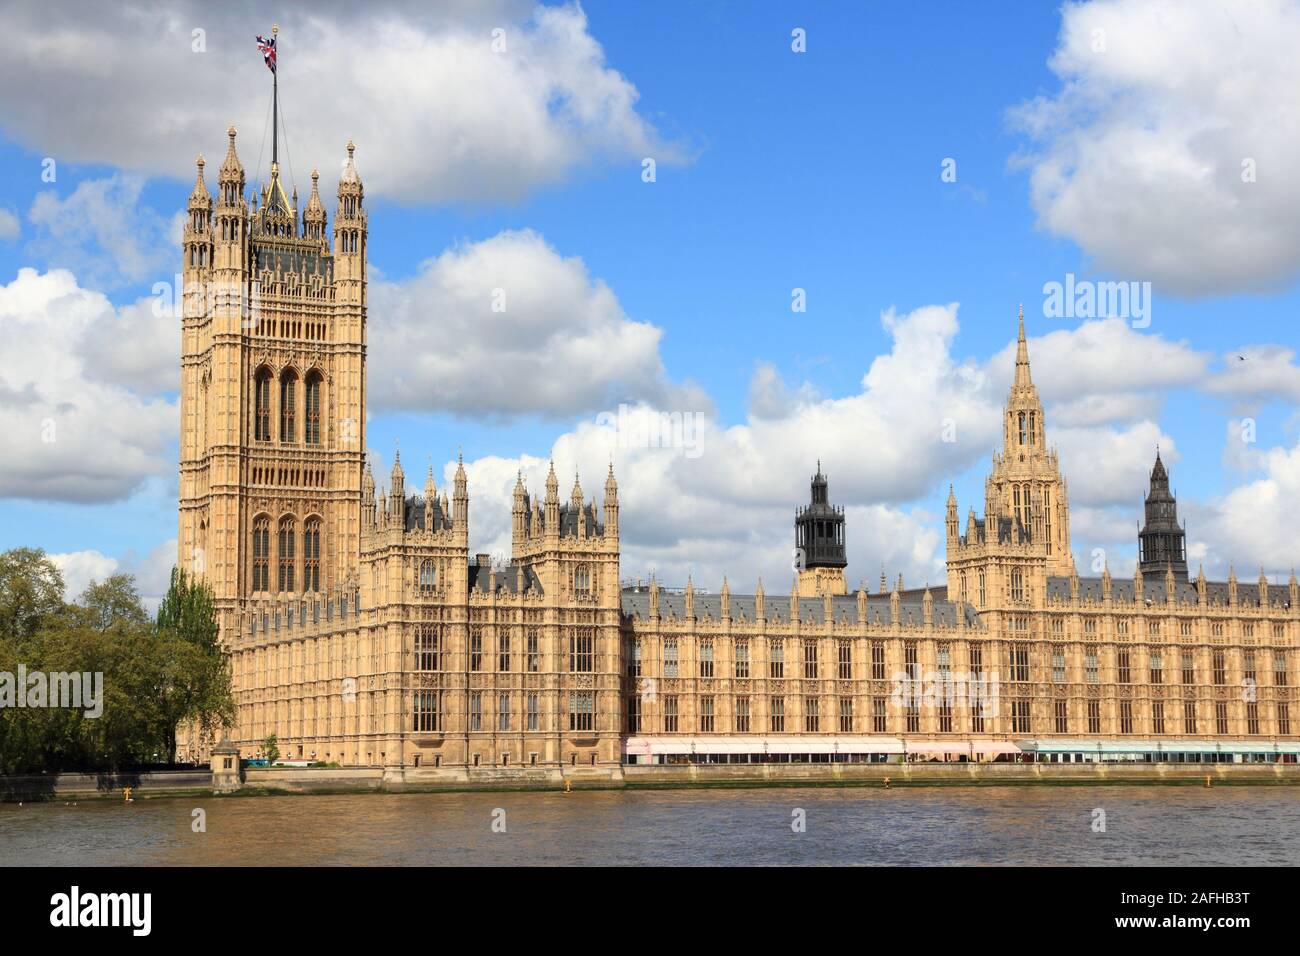 London UK - Palace of Westminster (Houses of Parliament) with Victoria tower. UNESCO World Heritage Site. Stock Photo